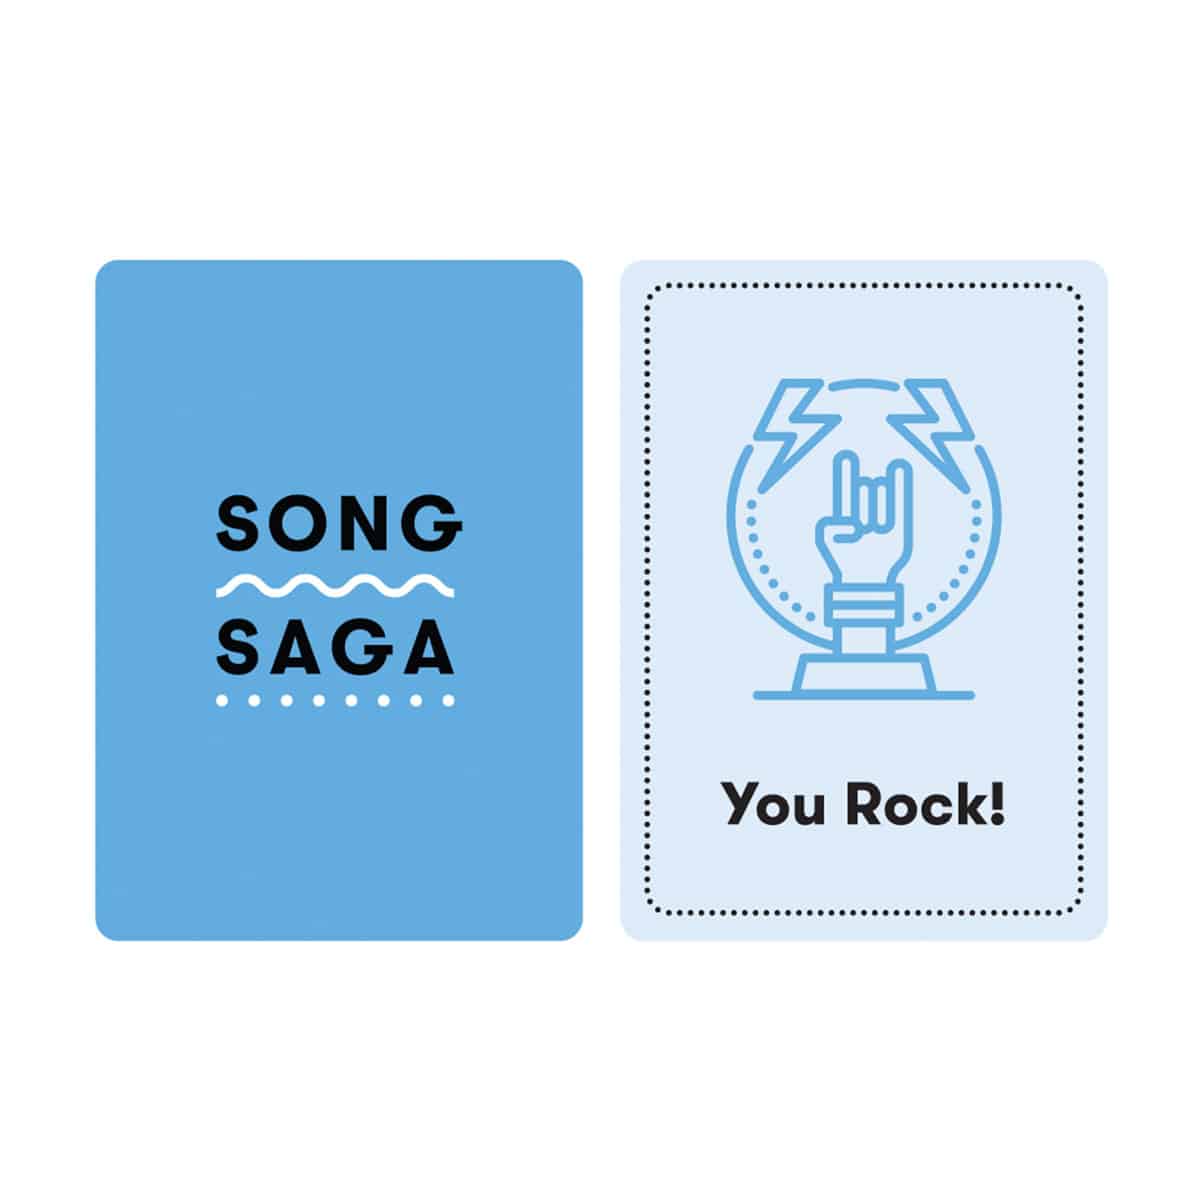 Song Saga Game, Music Game, Story Game, Party Game, Best Party Games, SongSaga, Green Box that Rocks, Card Game, Cards, You Rock Game, Conversation Starters Game, Spotify Game